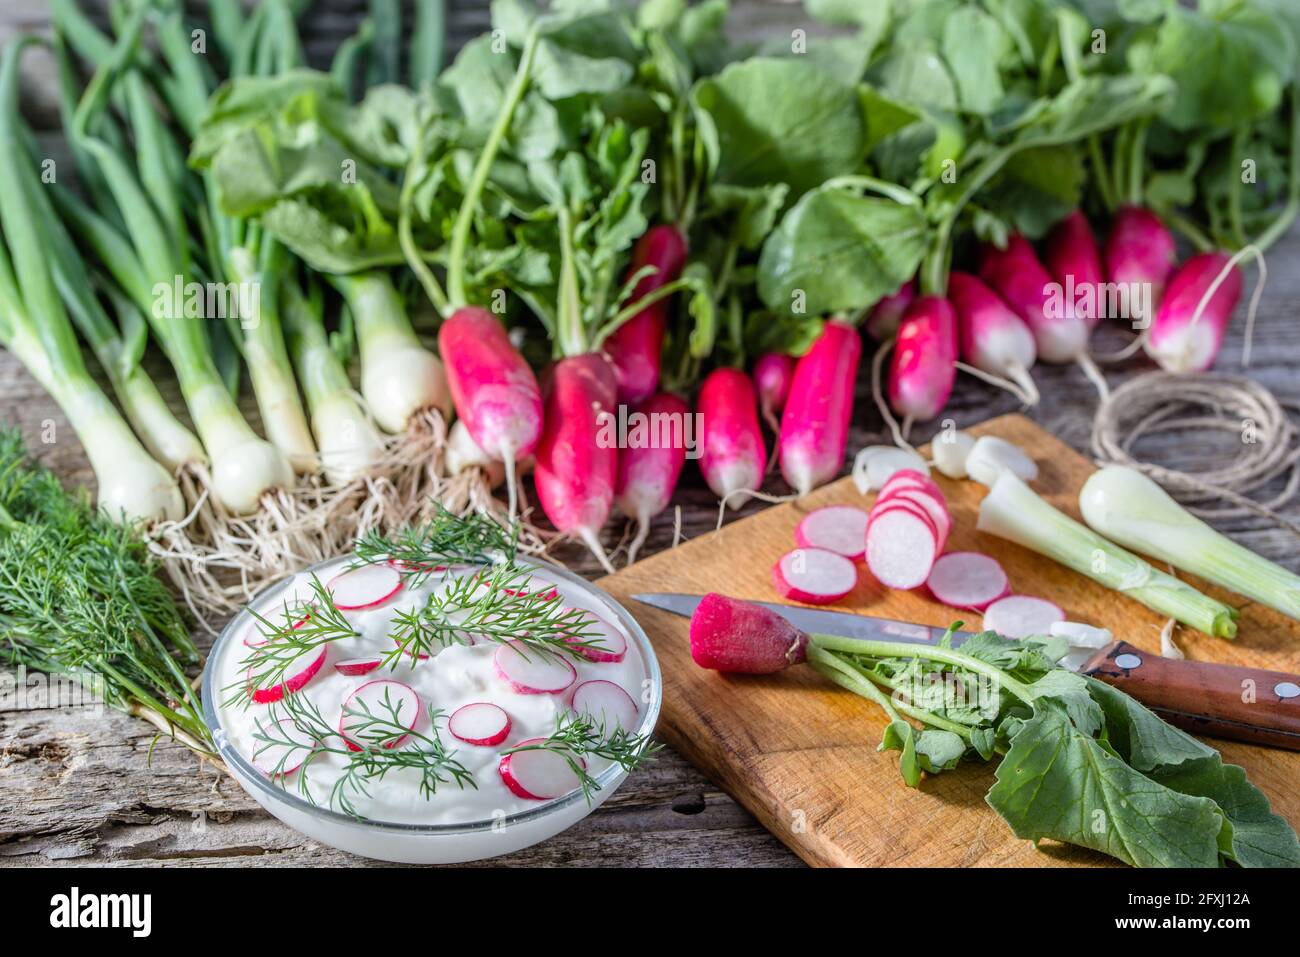 Dietary cottage cheese with radish, healthy eating, vegetarian diet concept Stock Photo